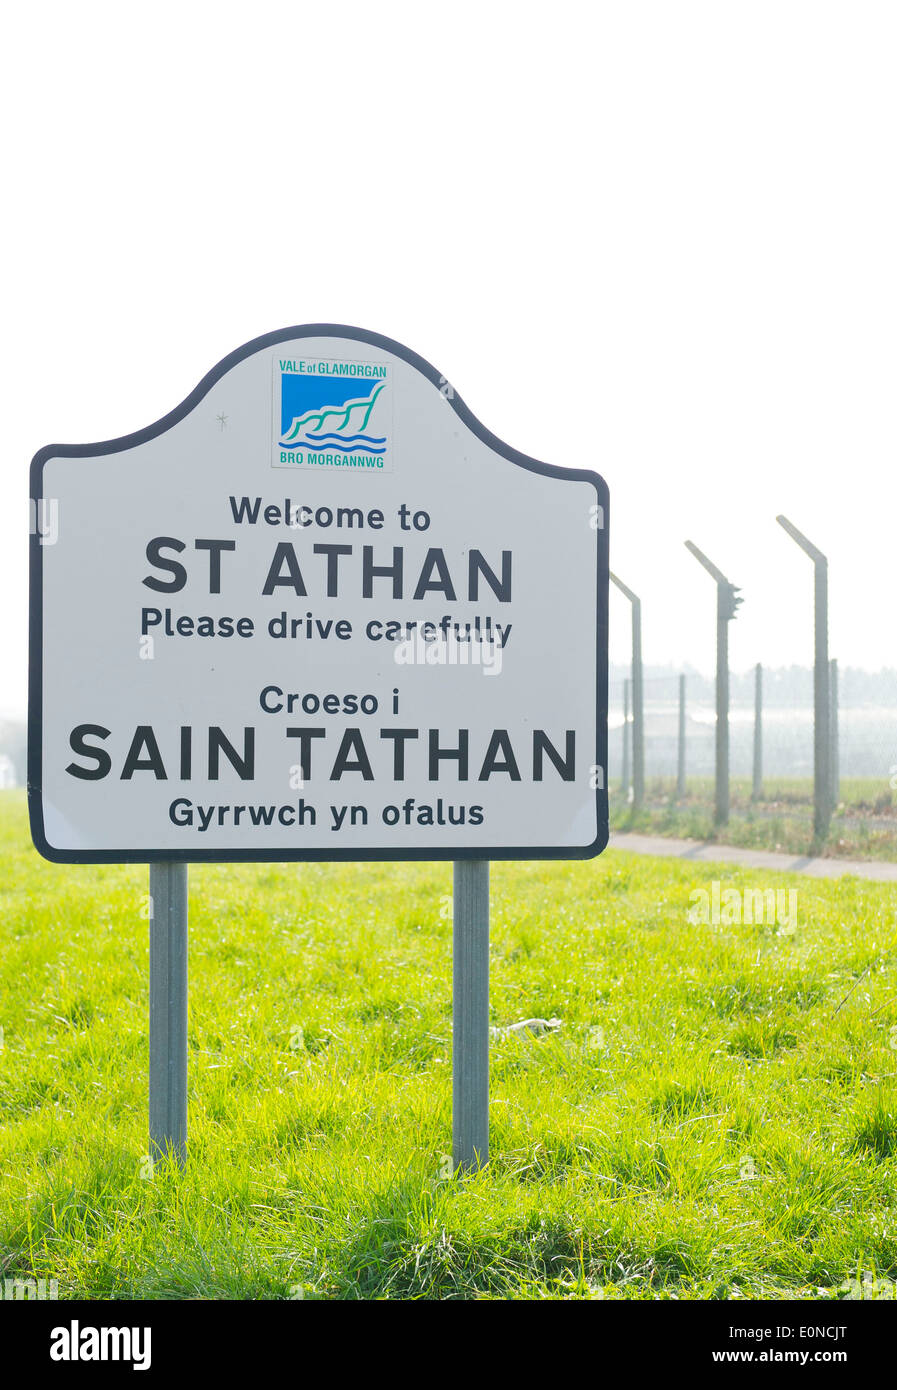 A welcome to St. Athan sign in the Vale of Glamorgan, Wales. Stock Photo